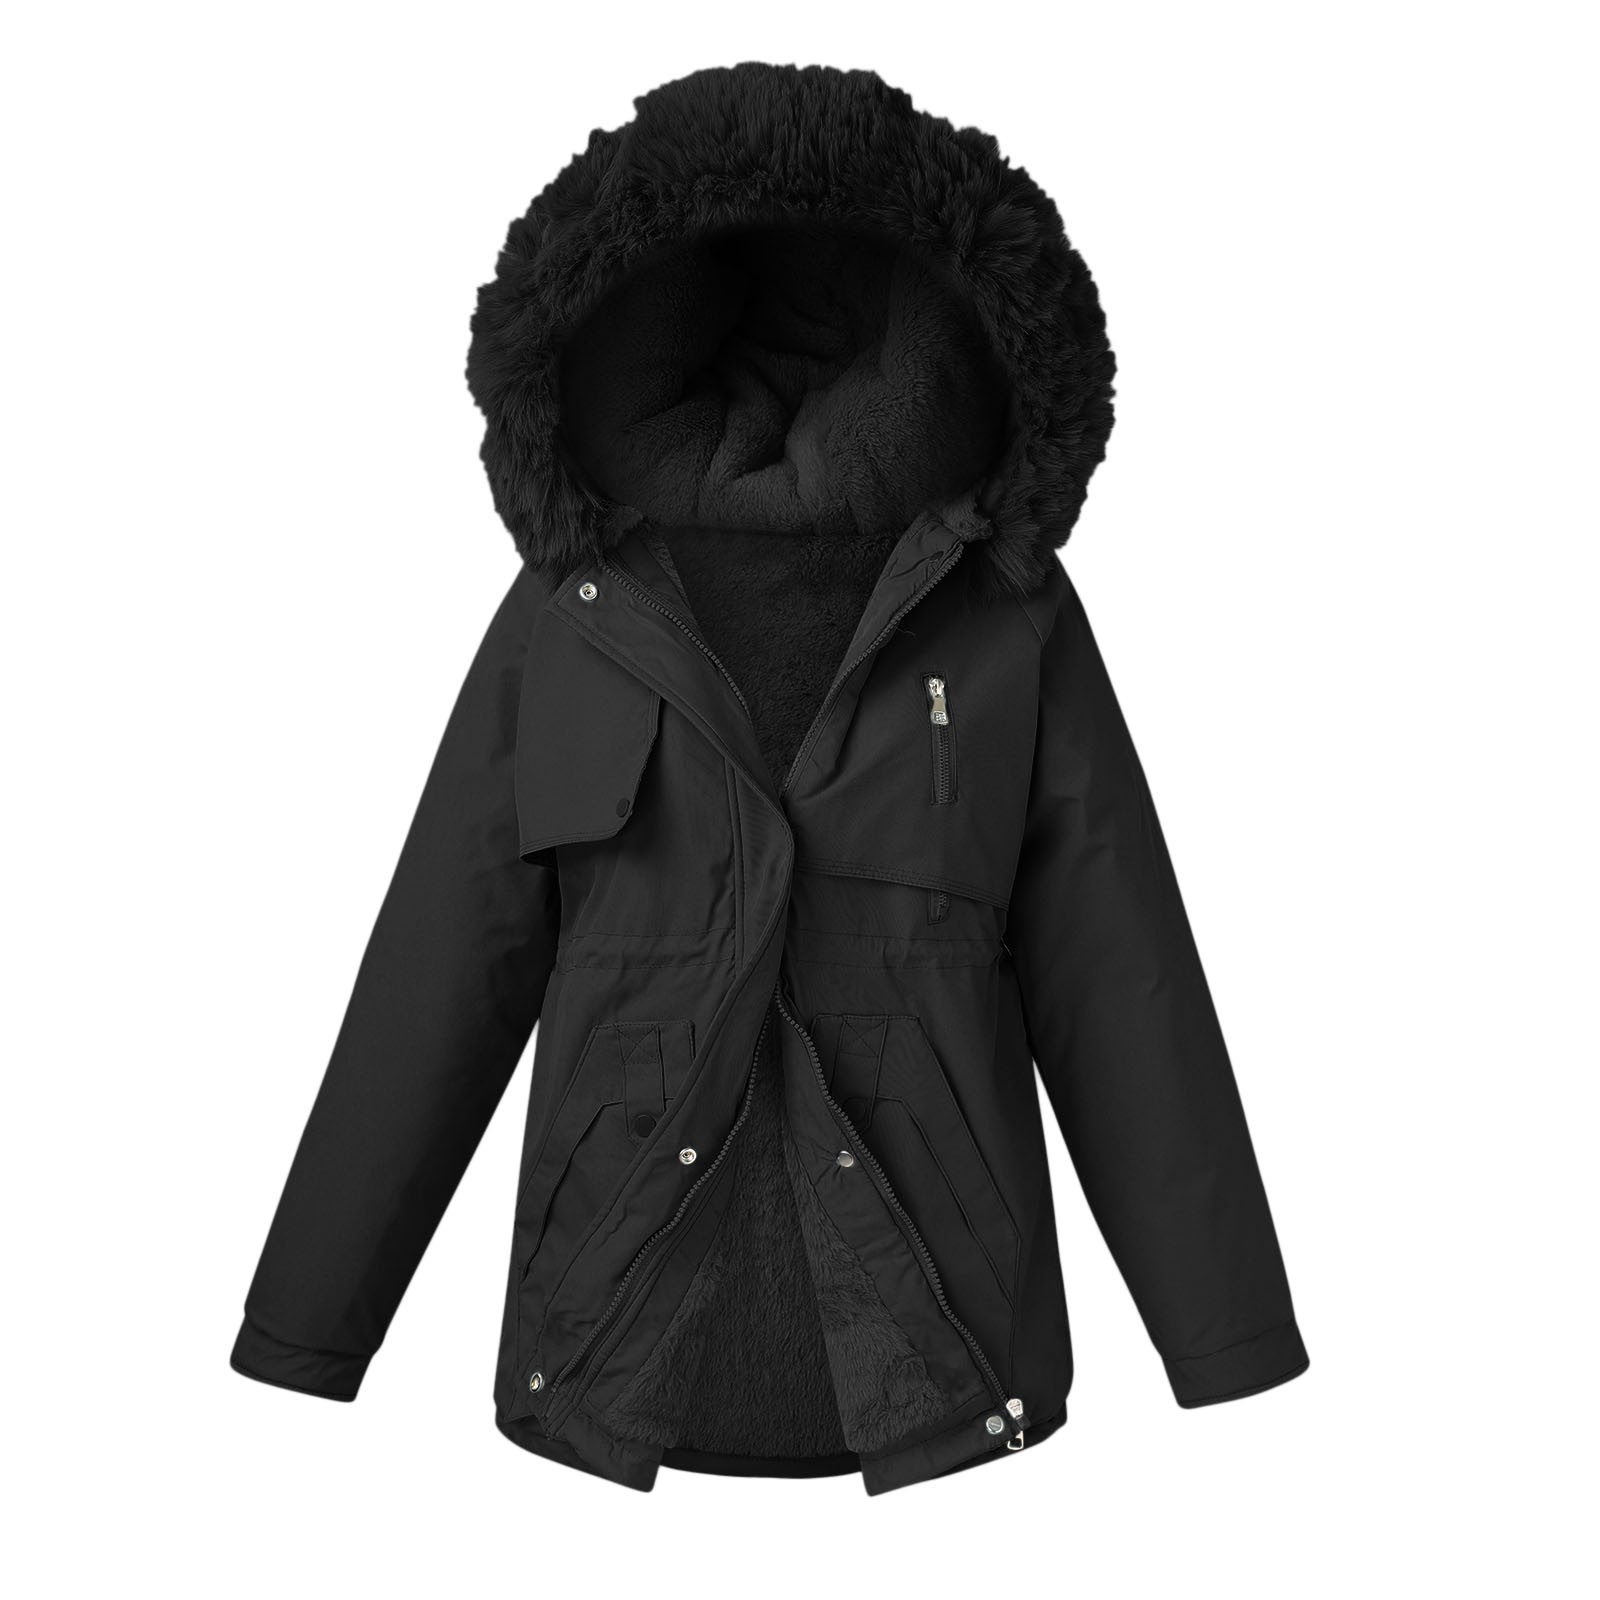 Short Work Jackets for Women Jackets for Woman Women Winter Coat Lapel Collar Long Sleeve Jacket Vintage Thicken Coat Jacket Warm Hooded Thick Padded Outerwear Big Impossibly Light Jacket - image 1 of 4